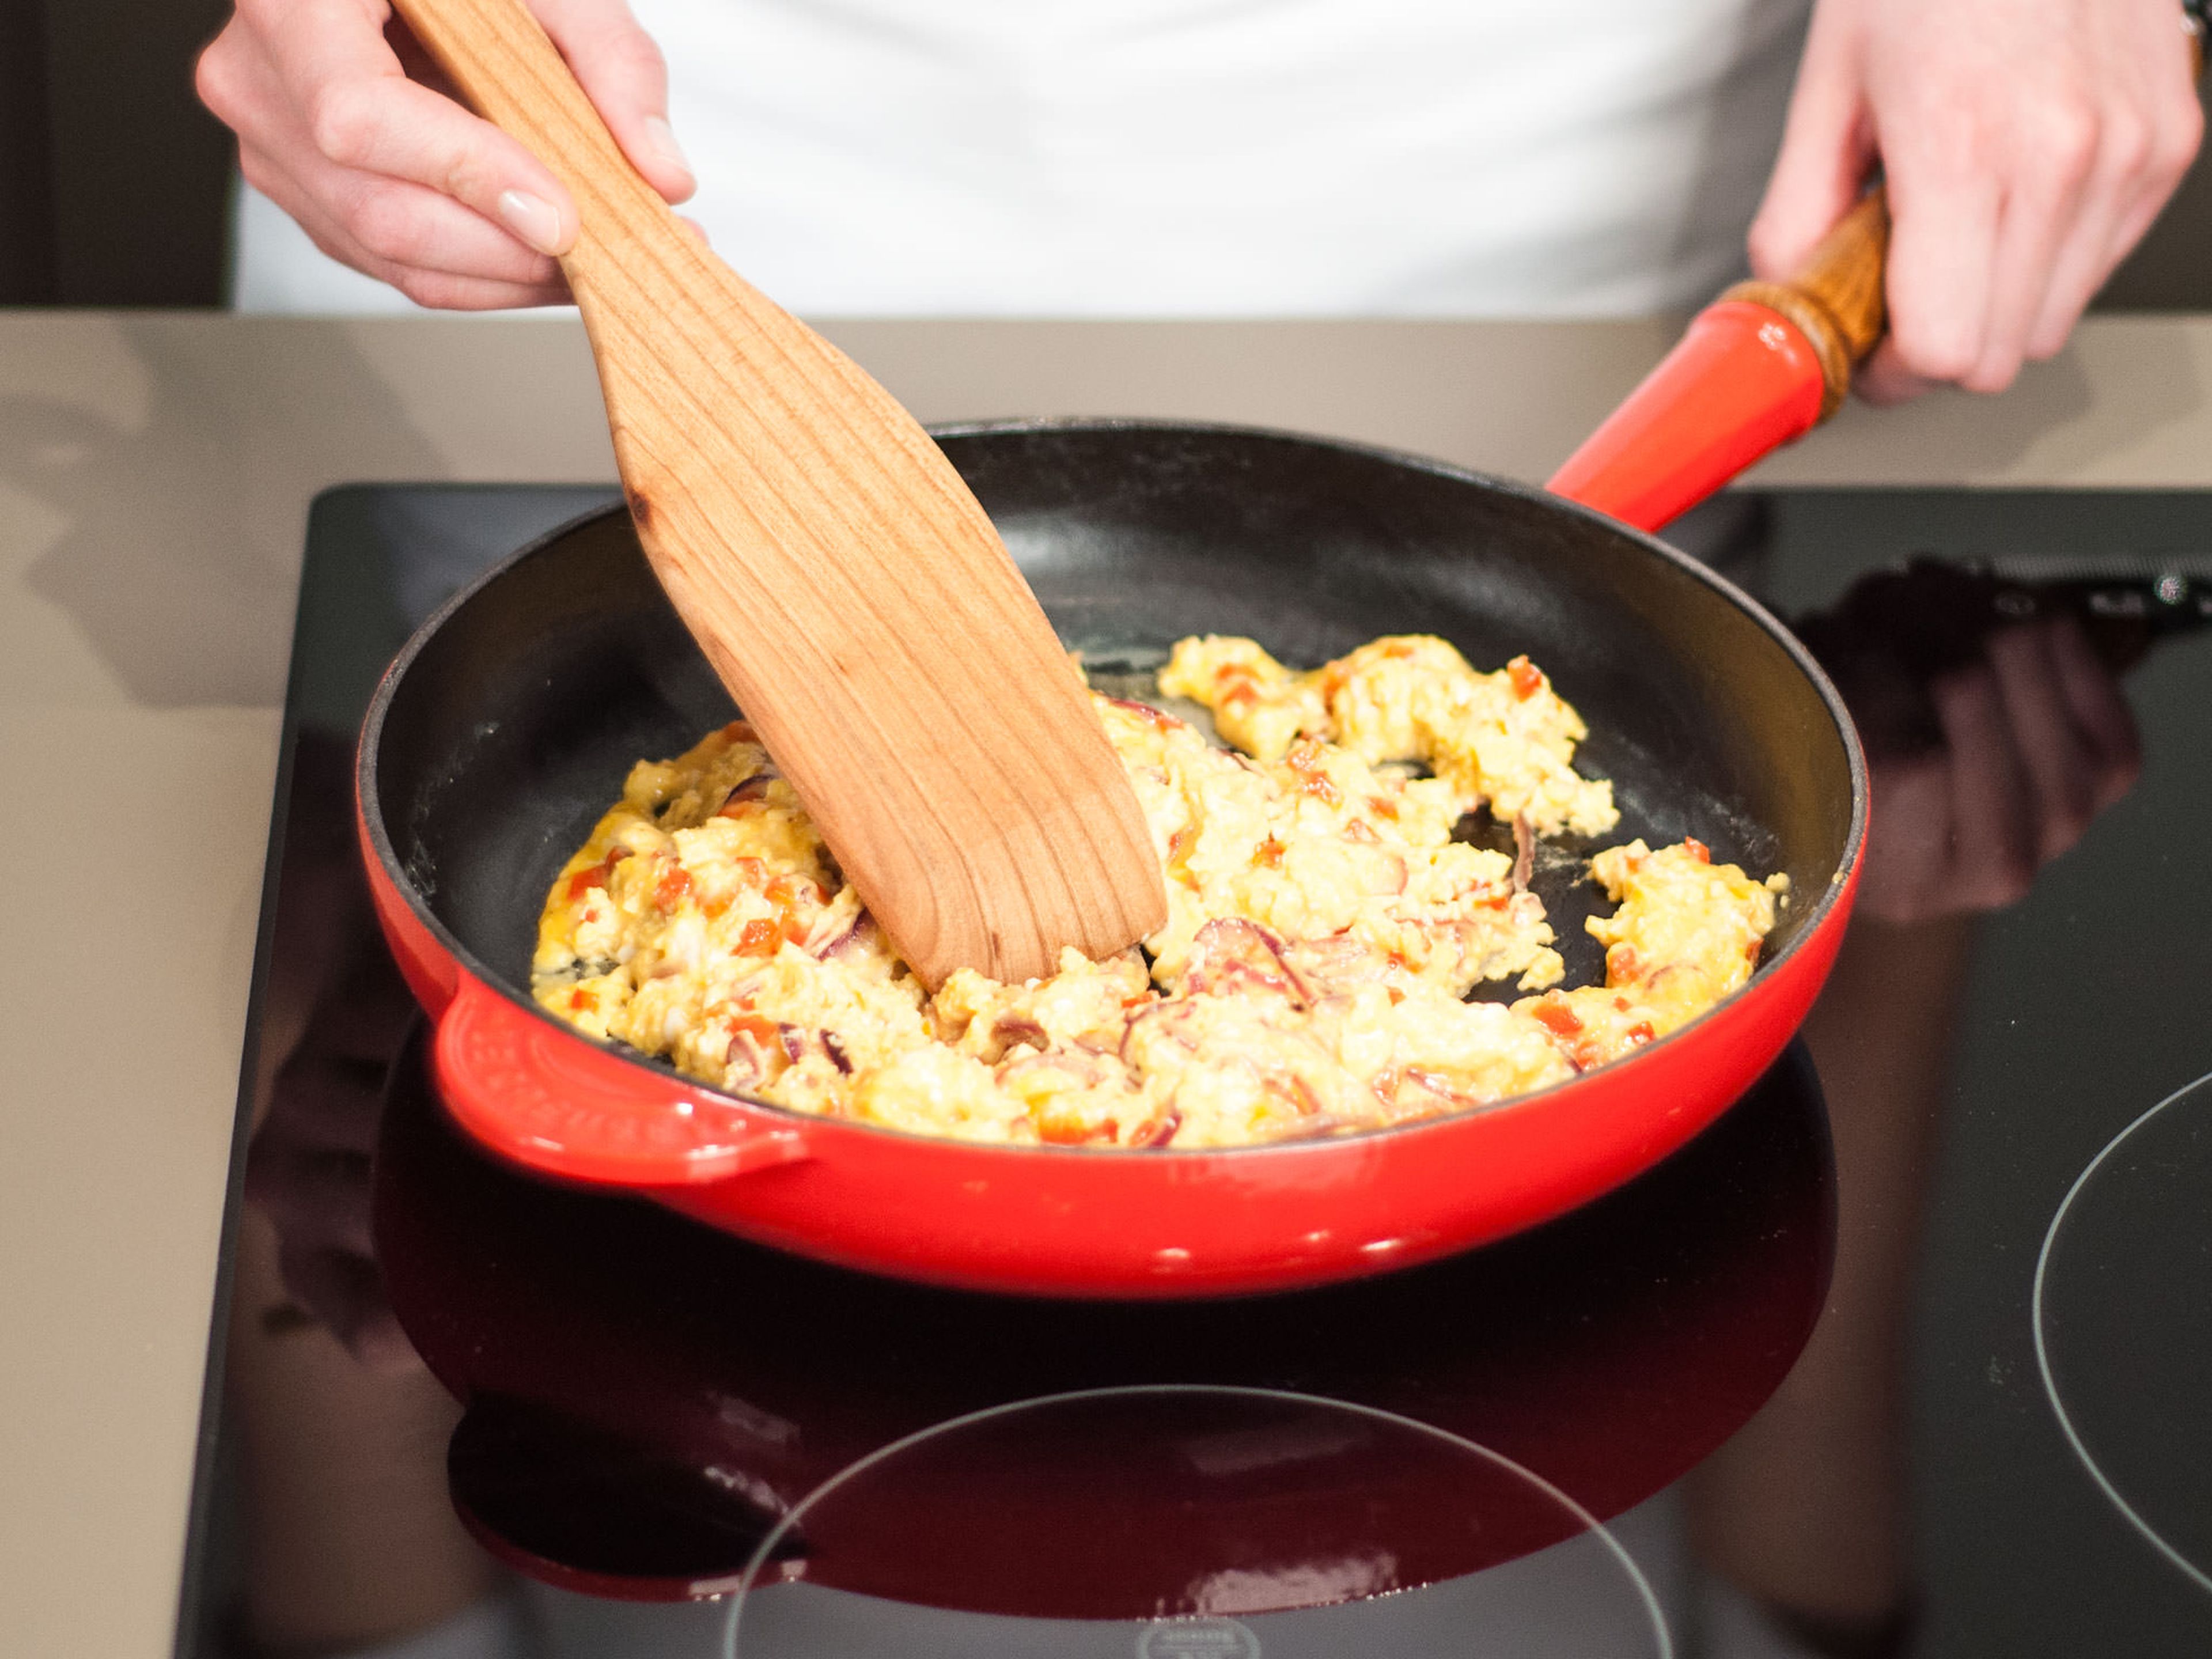 Add eggs to the pan and continue to sauté, stirring occasionally, for approx. 3 – 5 min. Then, add the cheese and stir until melted.